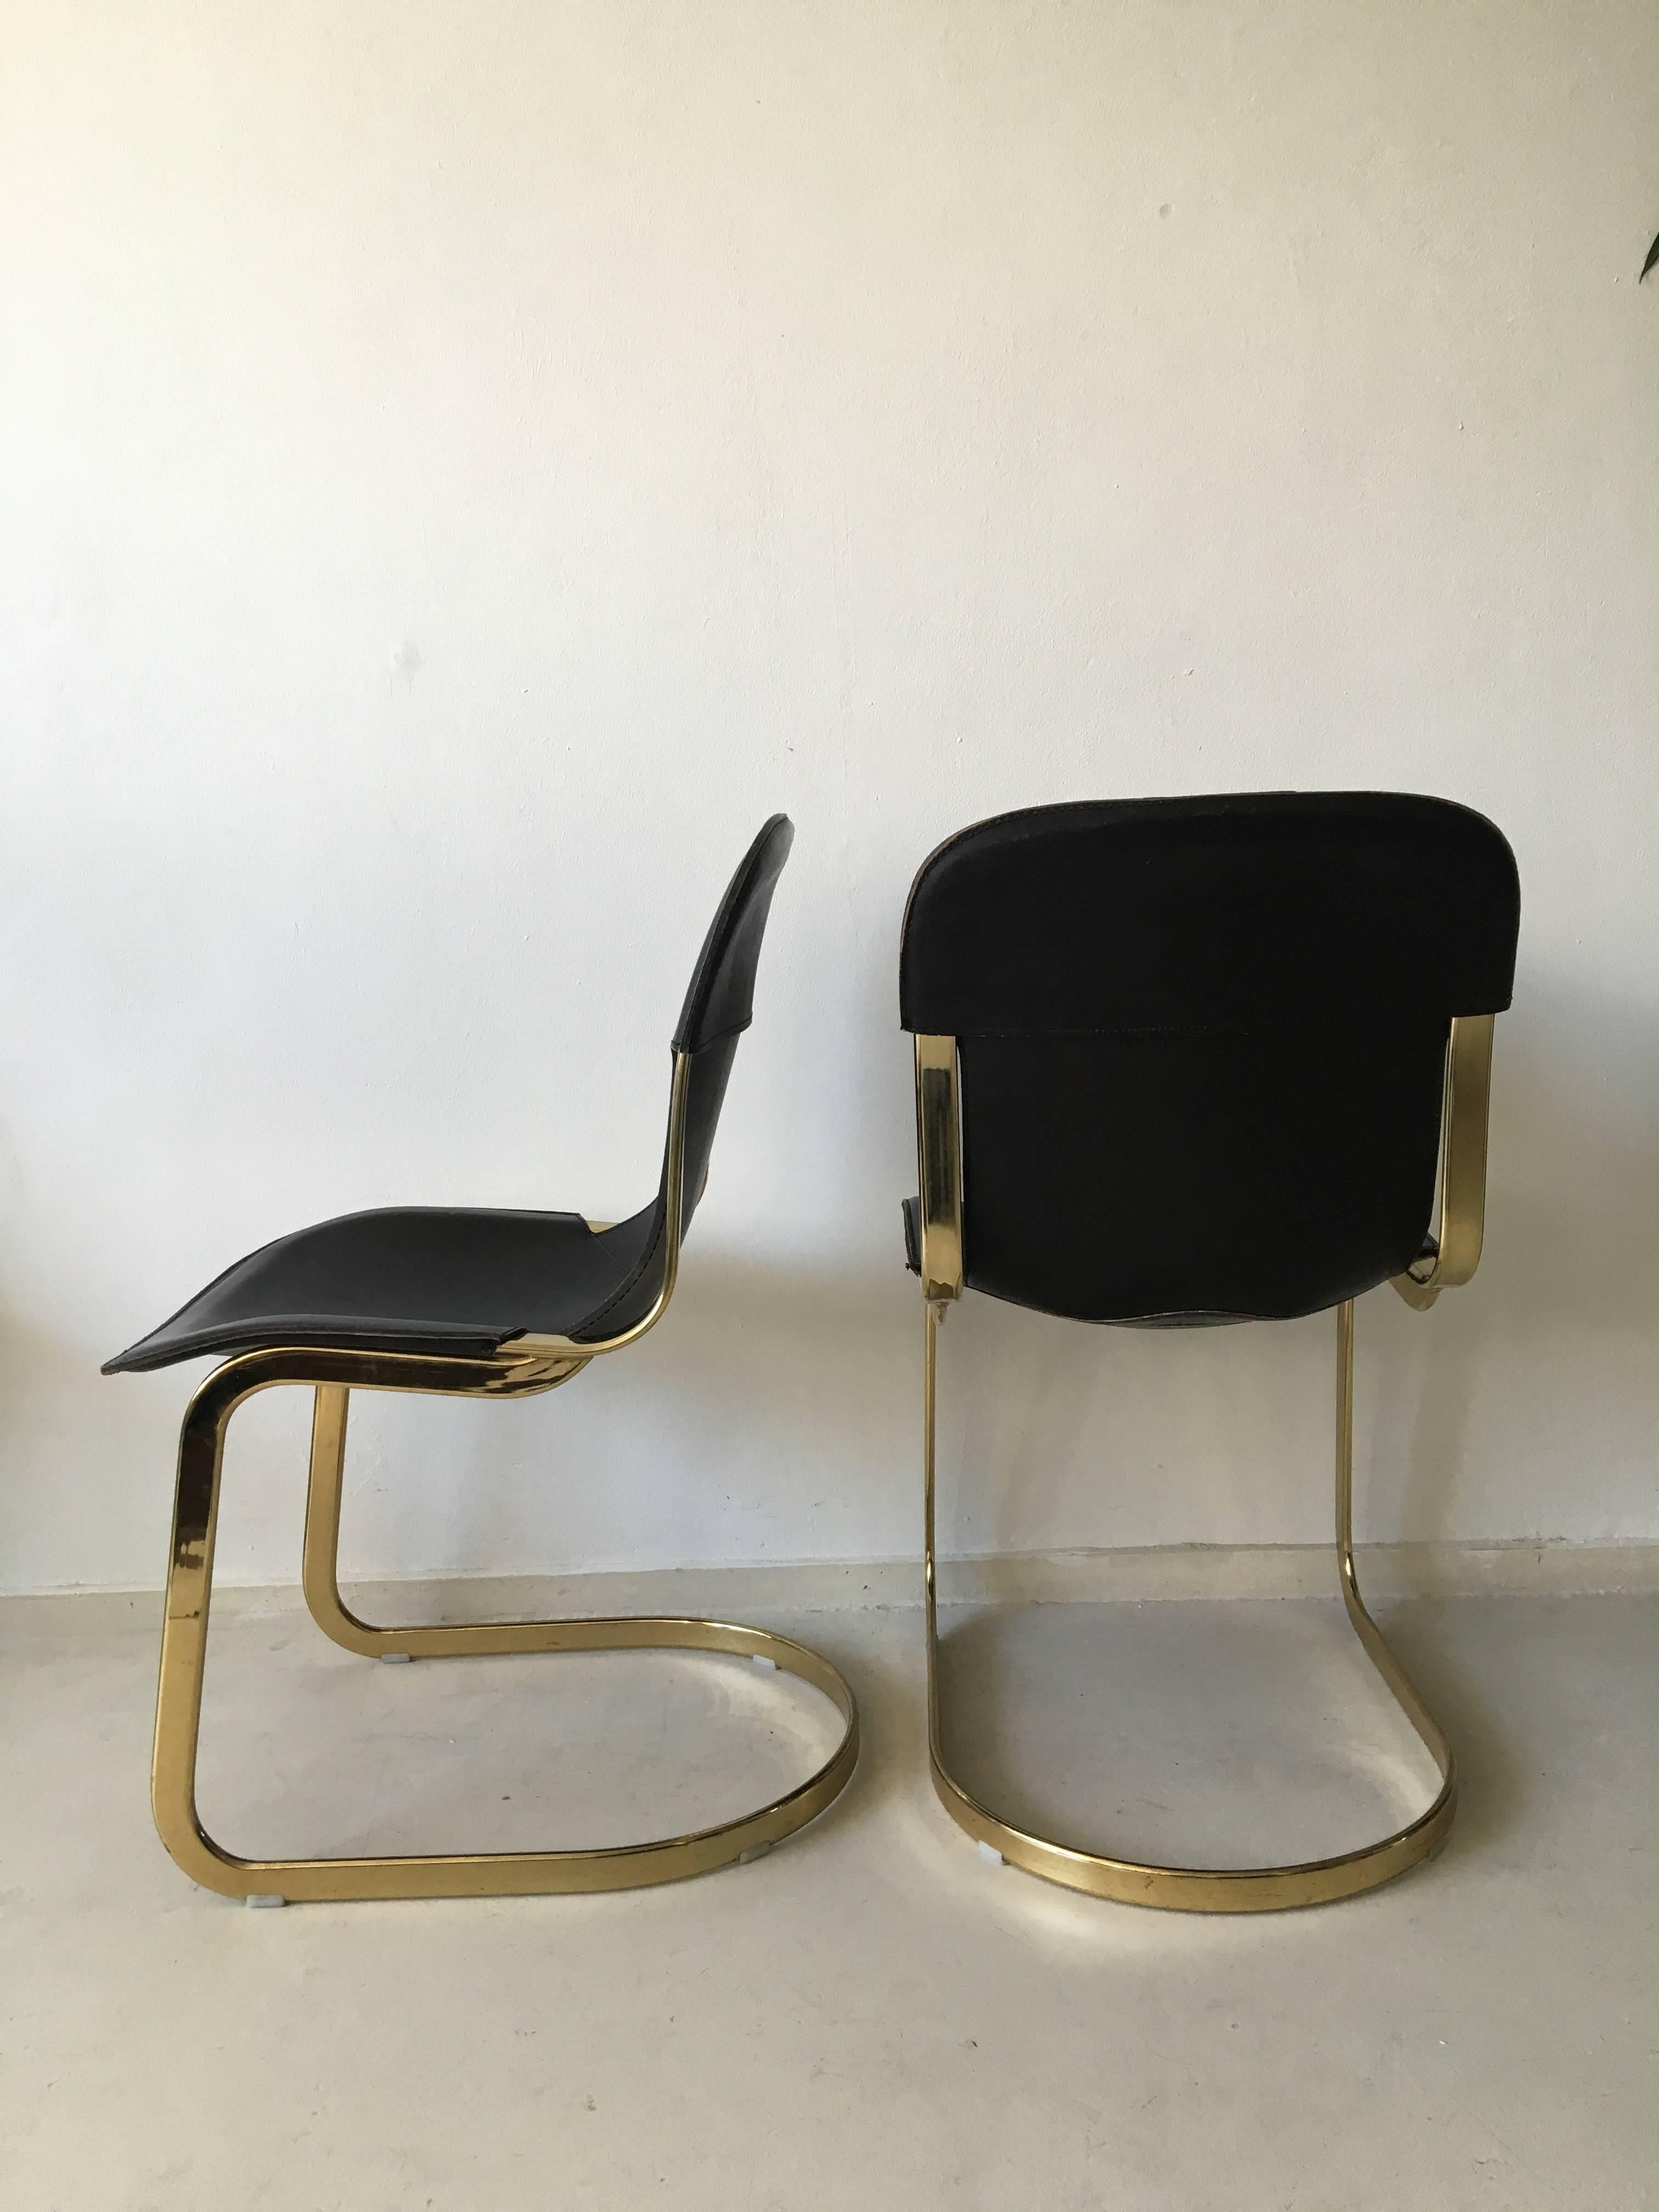 This set of two dining chairs were designed by Willy Rizzo for Cidue in the 1960s. This duo consists of a brass frame and a thick, dark brown leather upholstery. The chairs remain in a very good vintage condition with minor wear.